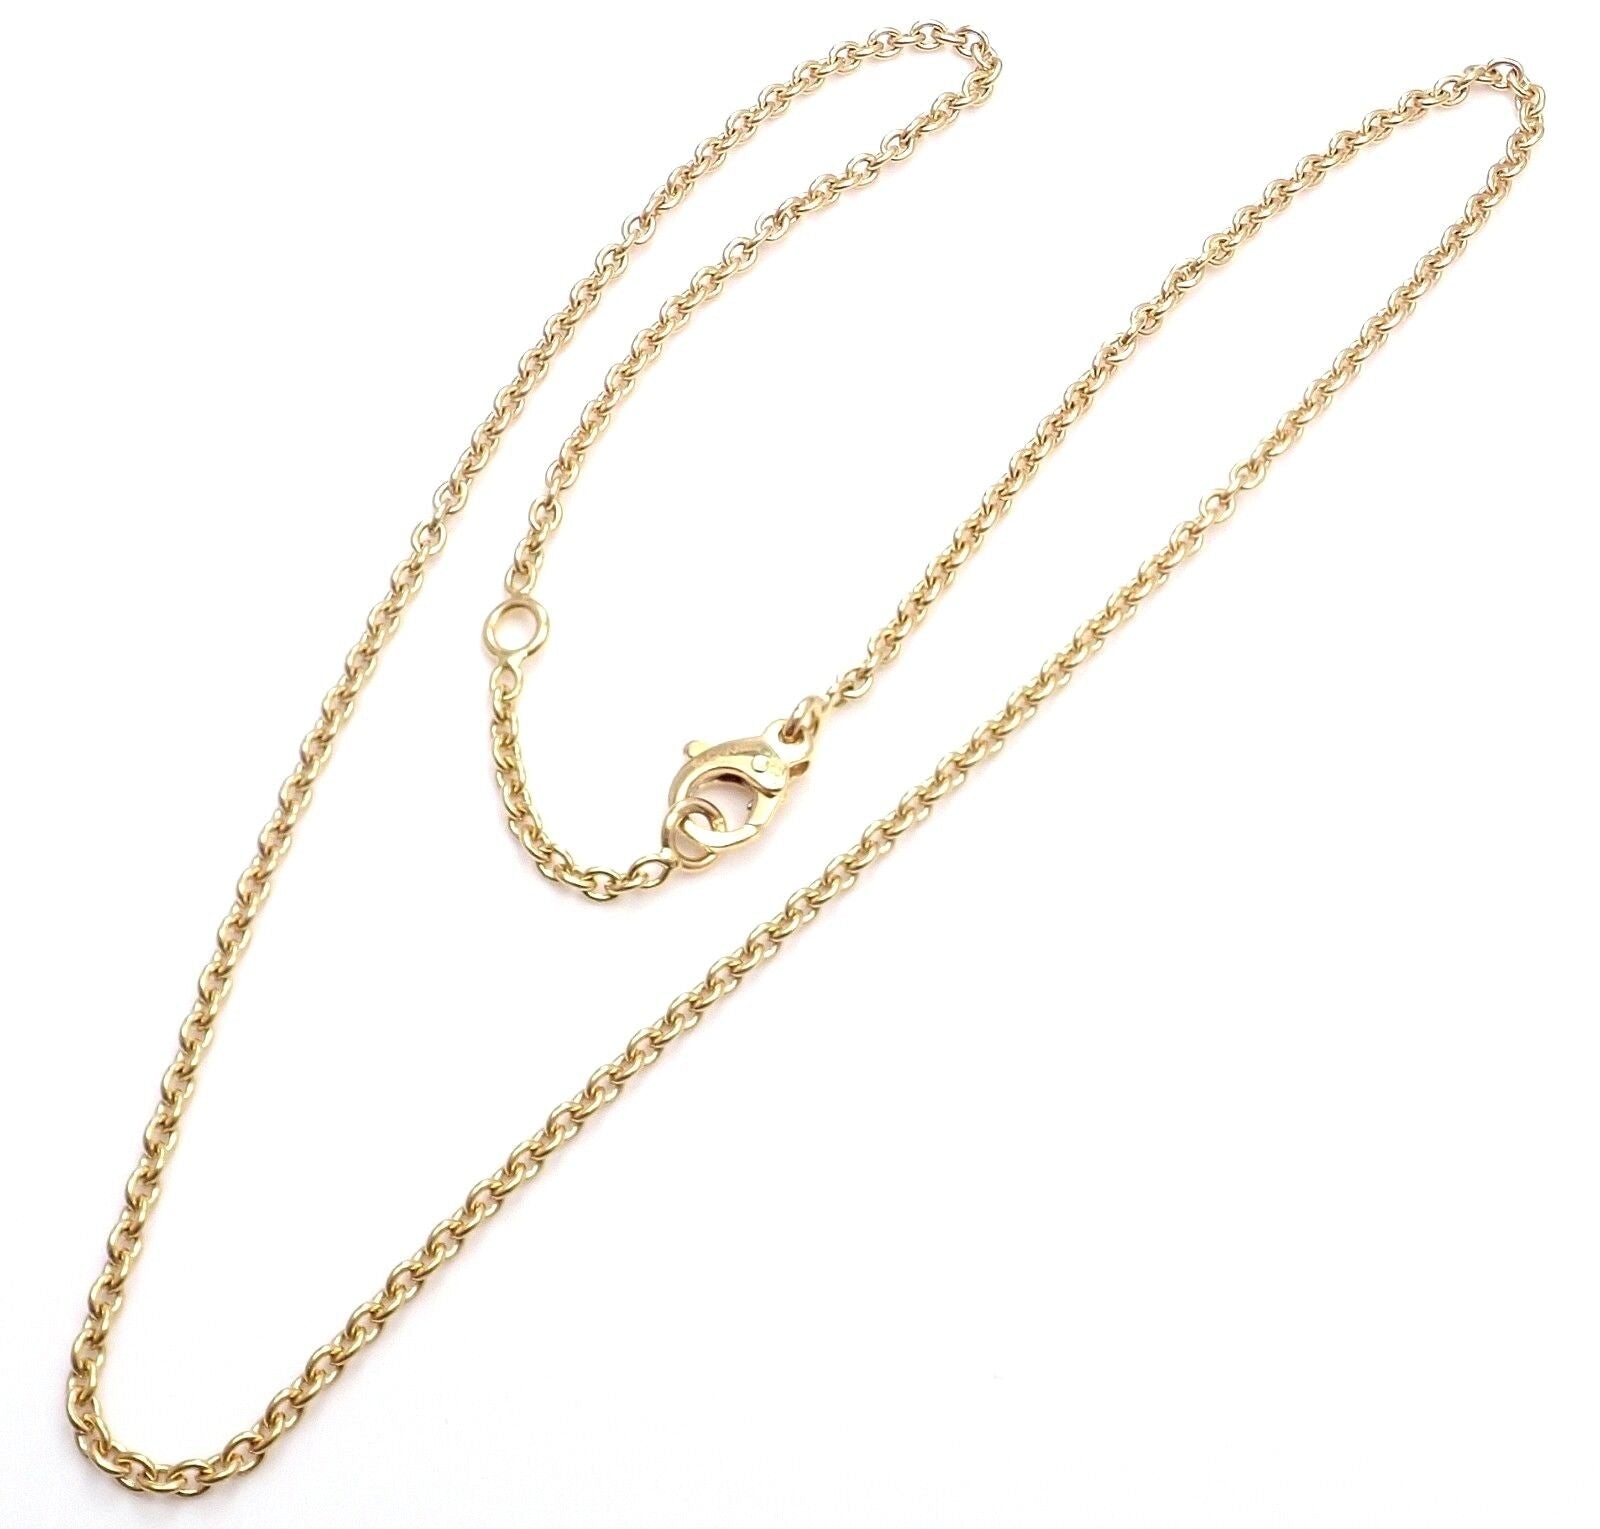 Chanel Jewelry & Watches:Fine Jewelry:Necklaces & Pendants Authentic Chanel 18k Yellow Gold Classic Round Chain Necklace 14.75" to 15.75"